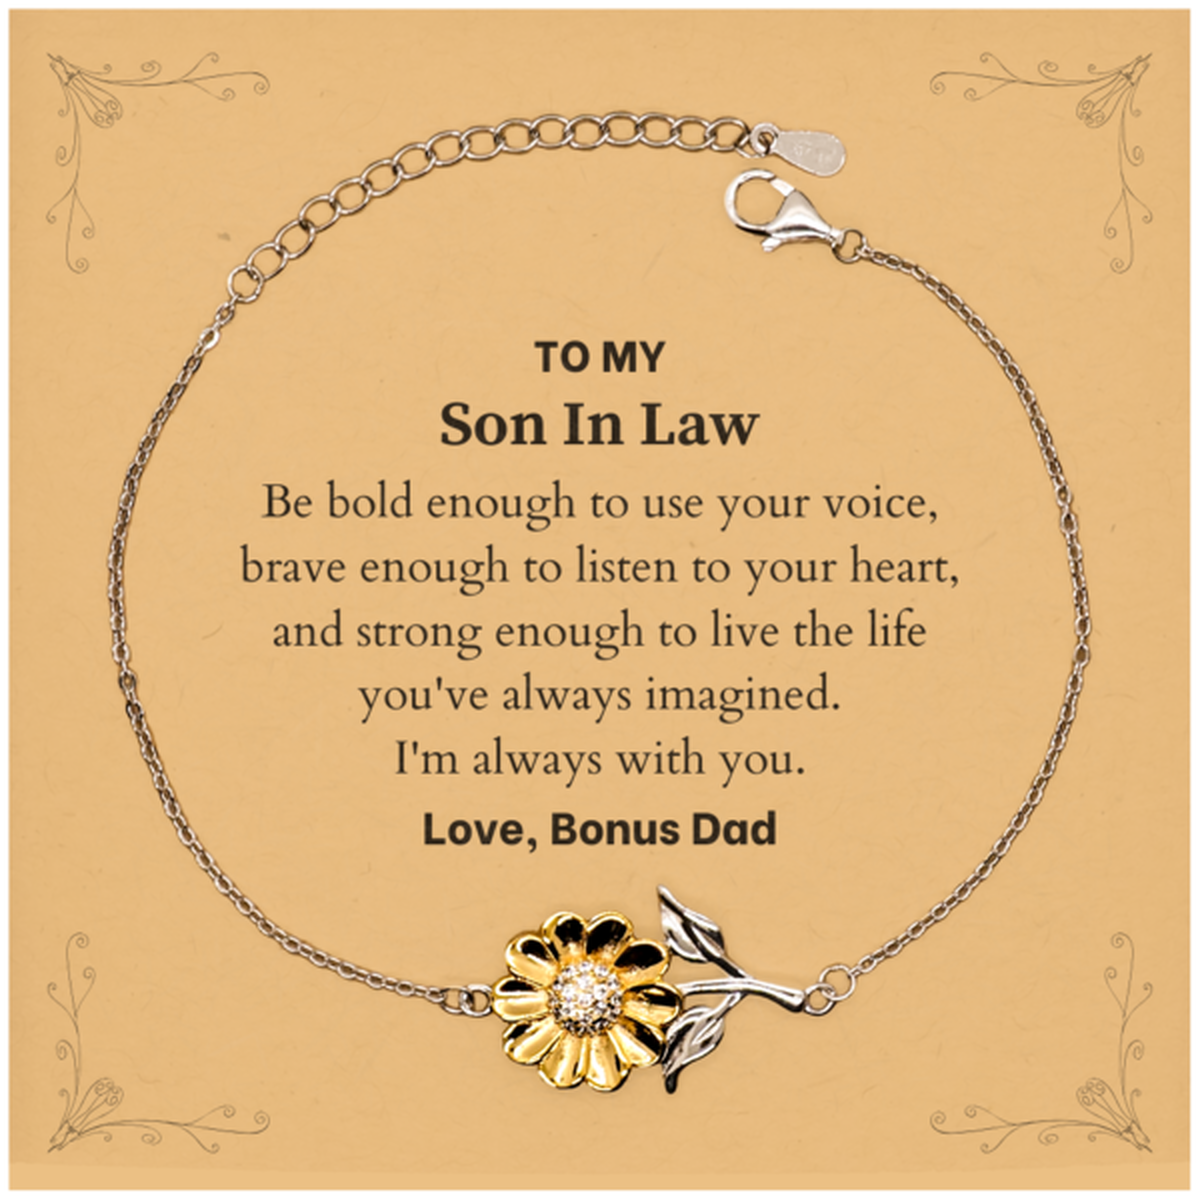 Keepsake Son In Law Sunflower Bracelet Gift Idea Graduation Christmas Birthday Son In Law from Bonus Dad, Son In Law Be bold enough to use your voice, brave enough to listen to your heart. Love, Bonus Dad